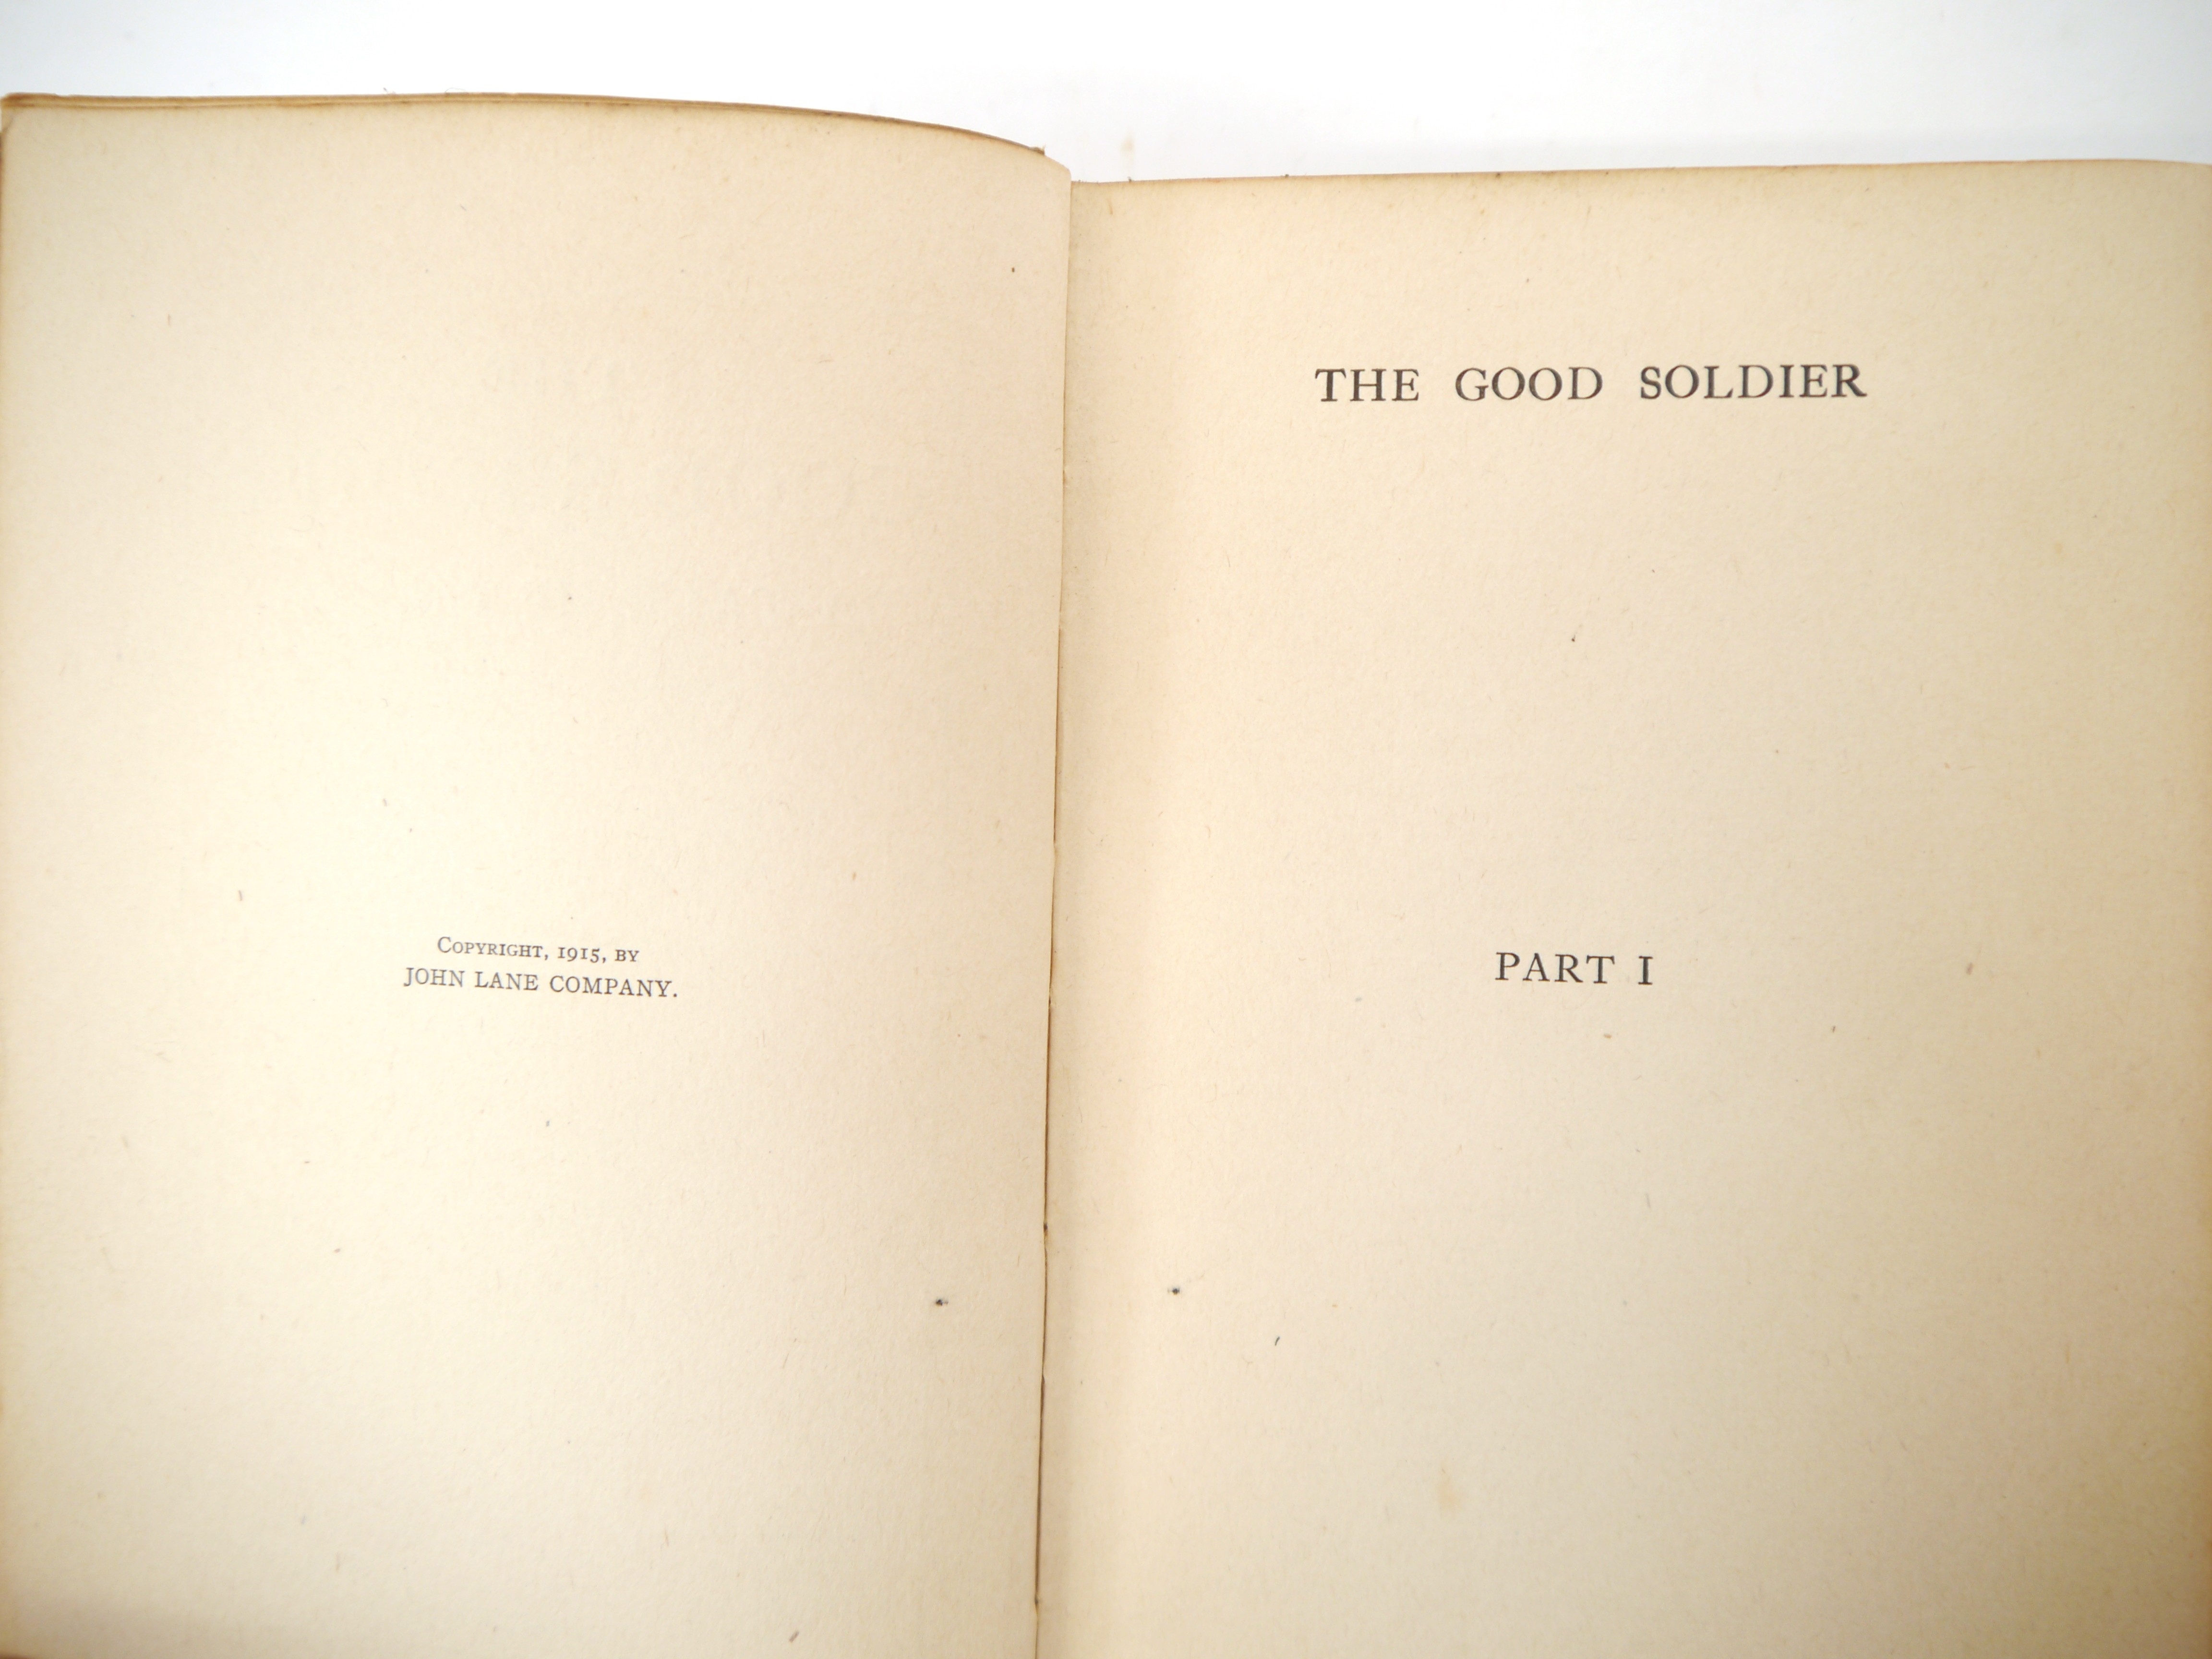 Ford Madox Ford (as Ford Madox Hueffer): 'The Good Soldier: A Tale of Passion', London, John Lane - Image 3 of 10